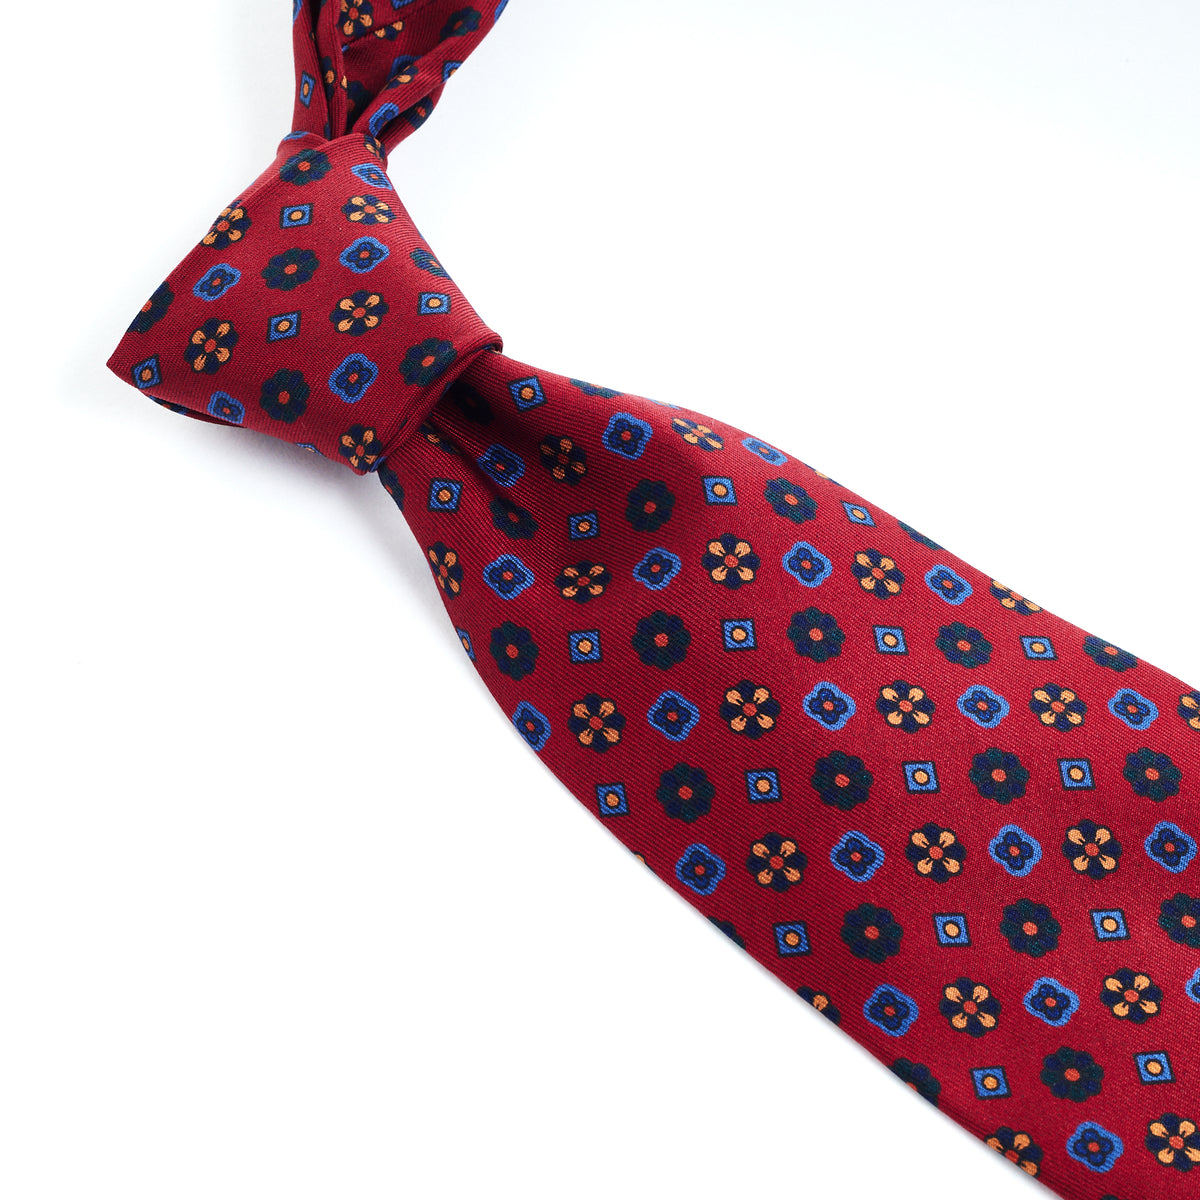 A Sovereign Grade Red Mixed Floret Ancient Madder Tie of exceptional craftsmanship with a blue and red pattern from KirbyAllison.com.